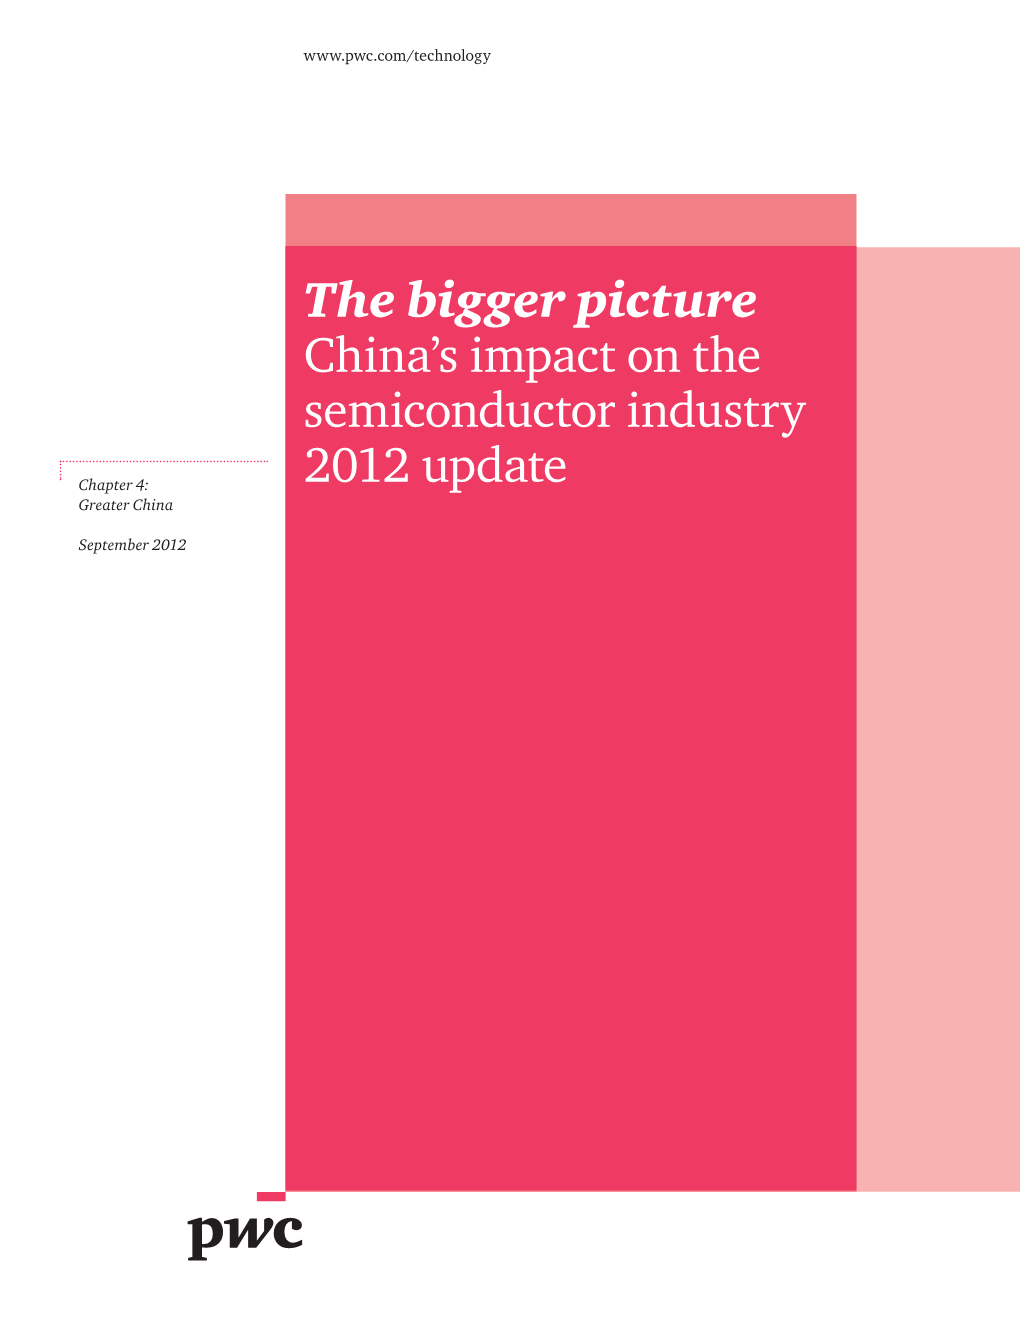 The Bigger Picture China's Impact on the Semiconductor Industry 2012